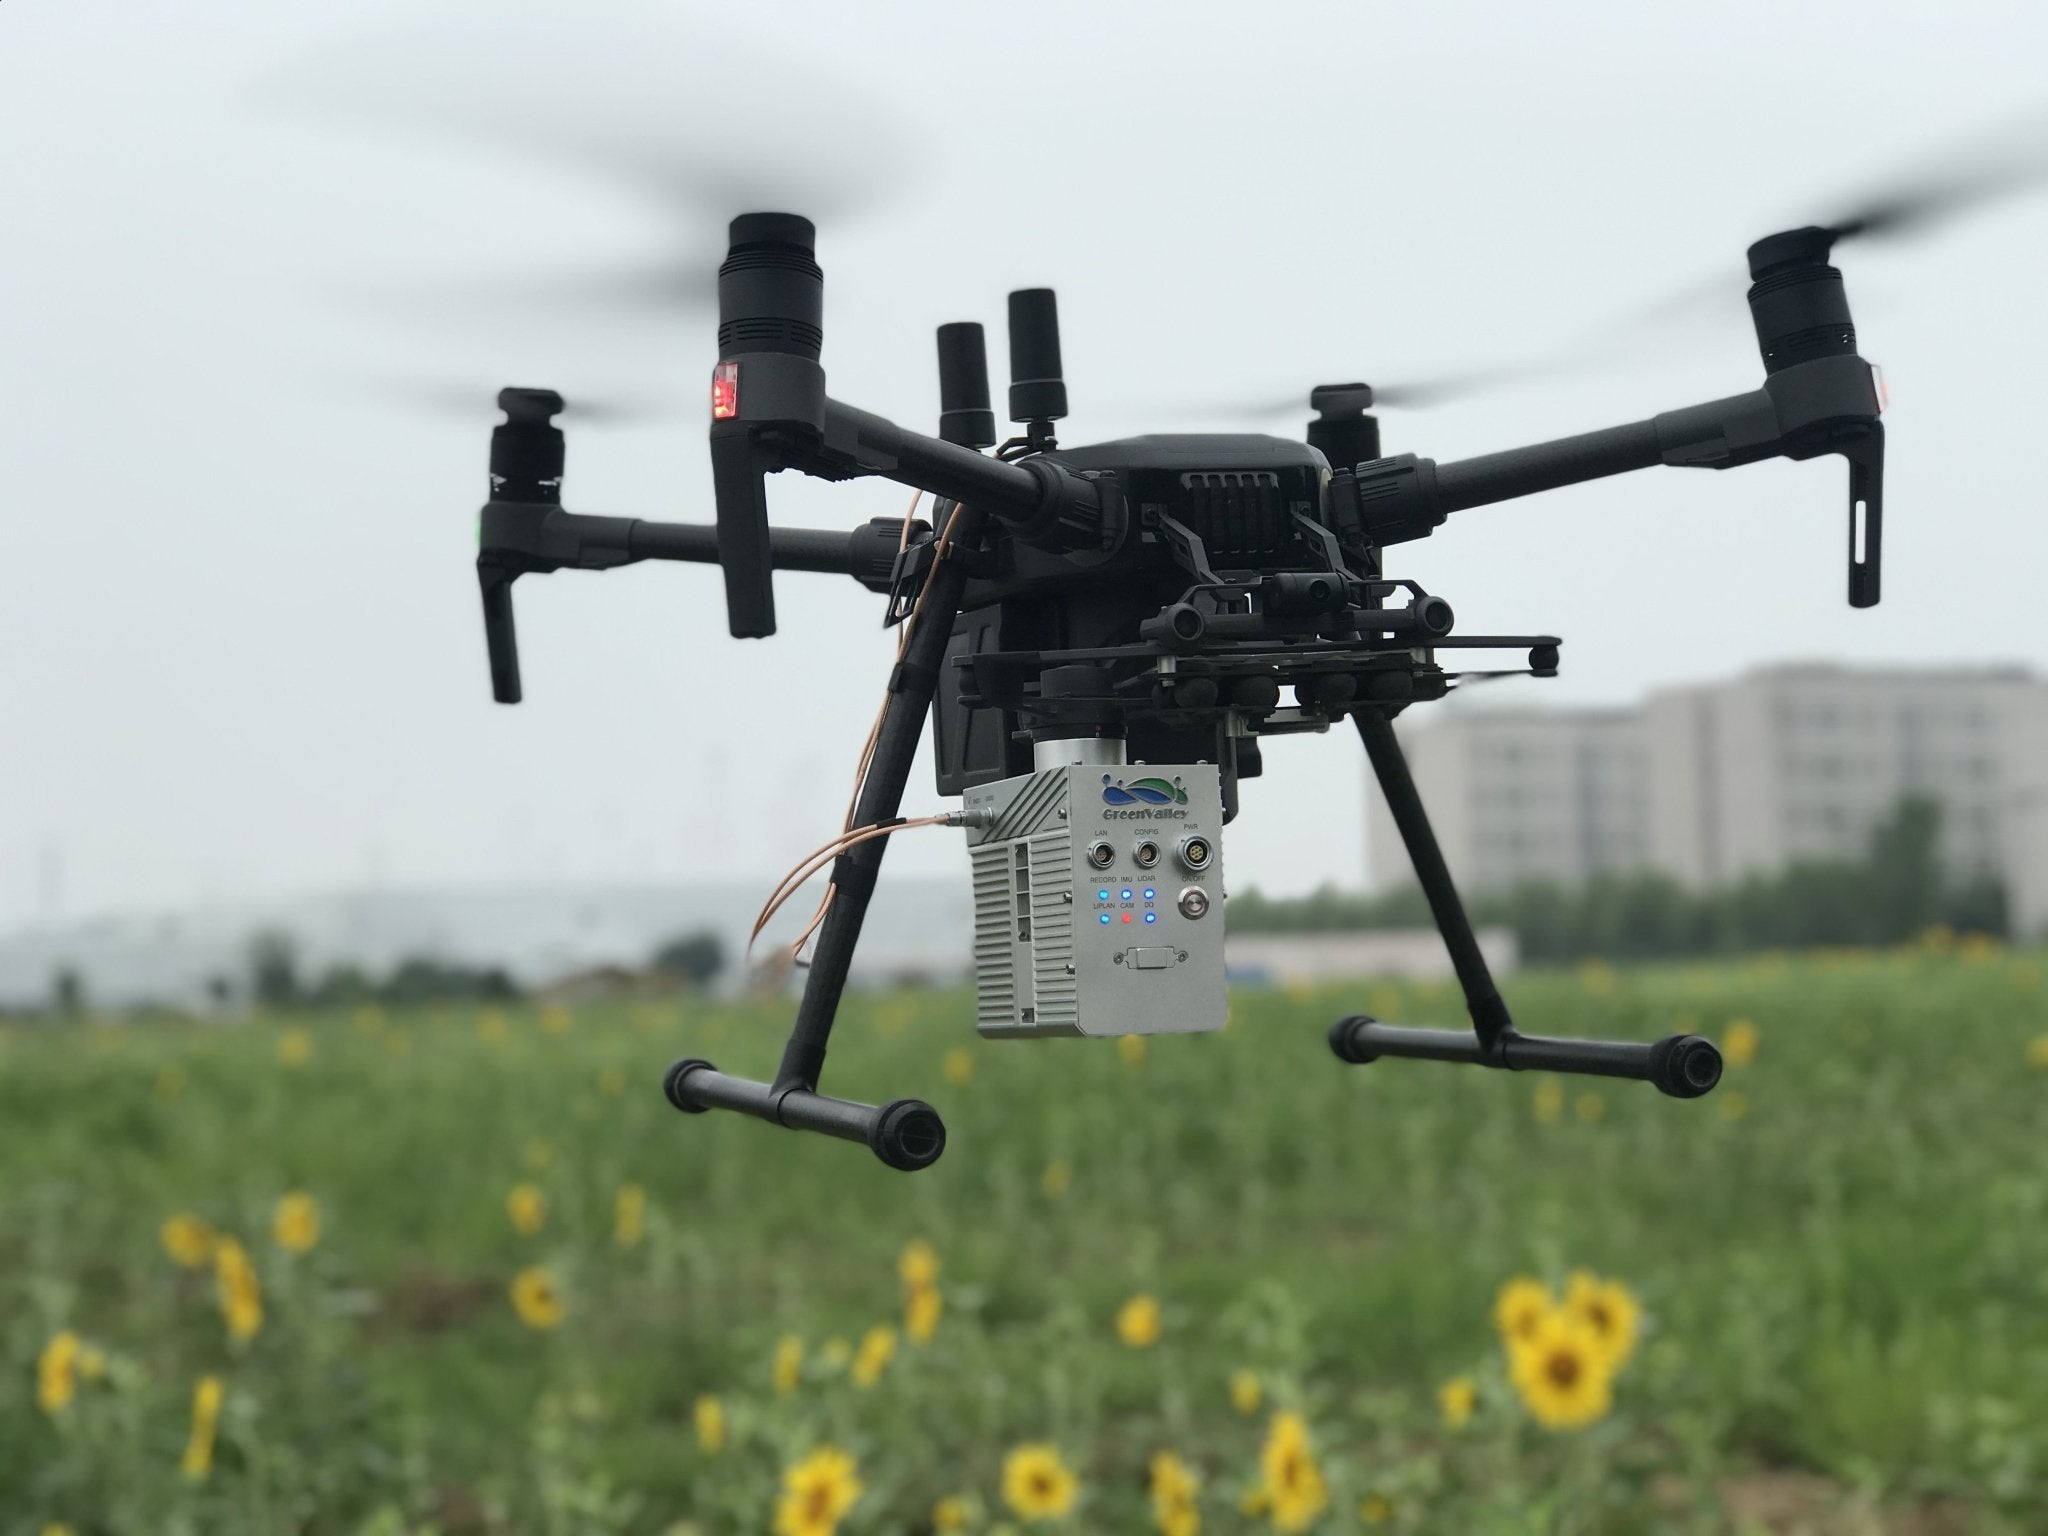 Drones With Follow-Me Features
